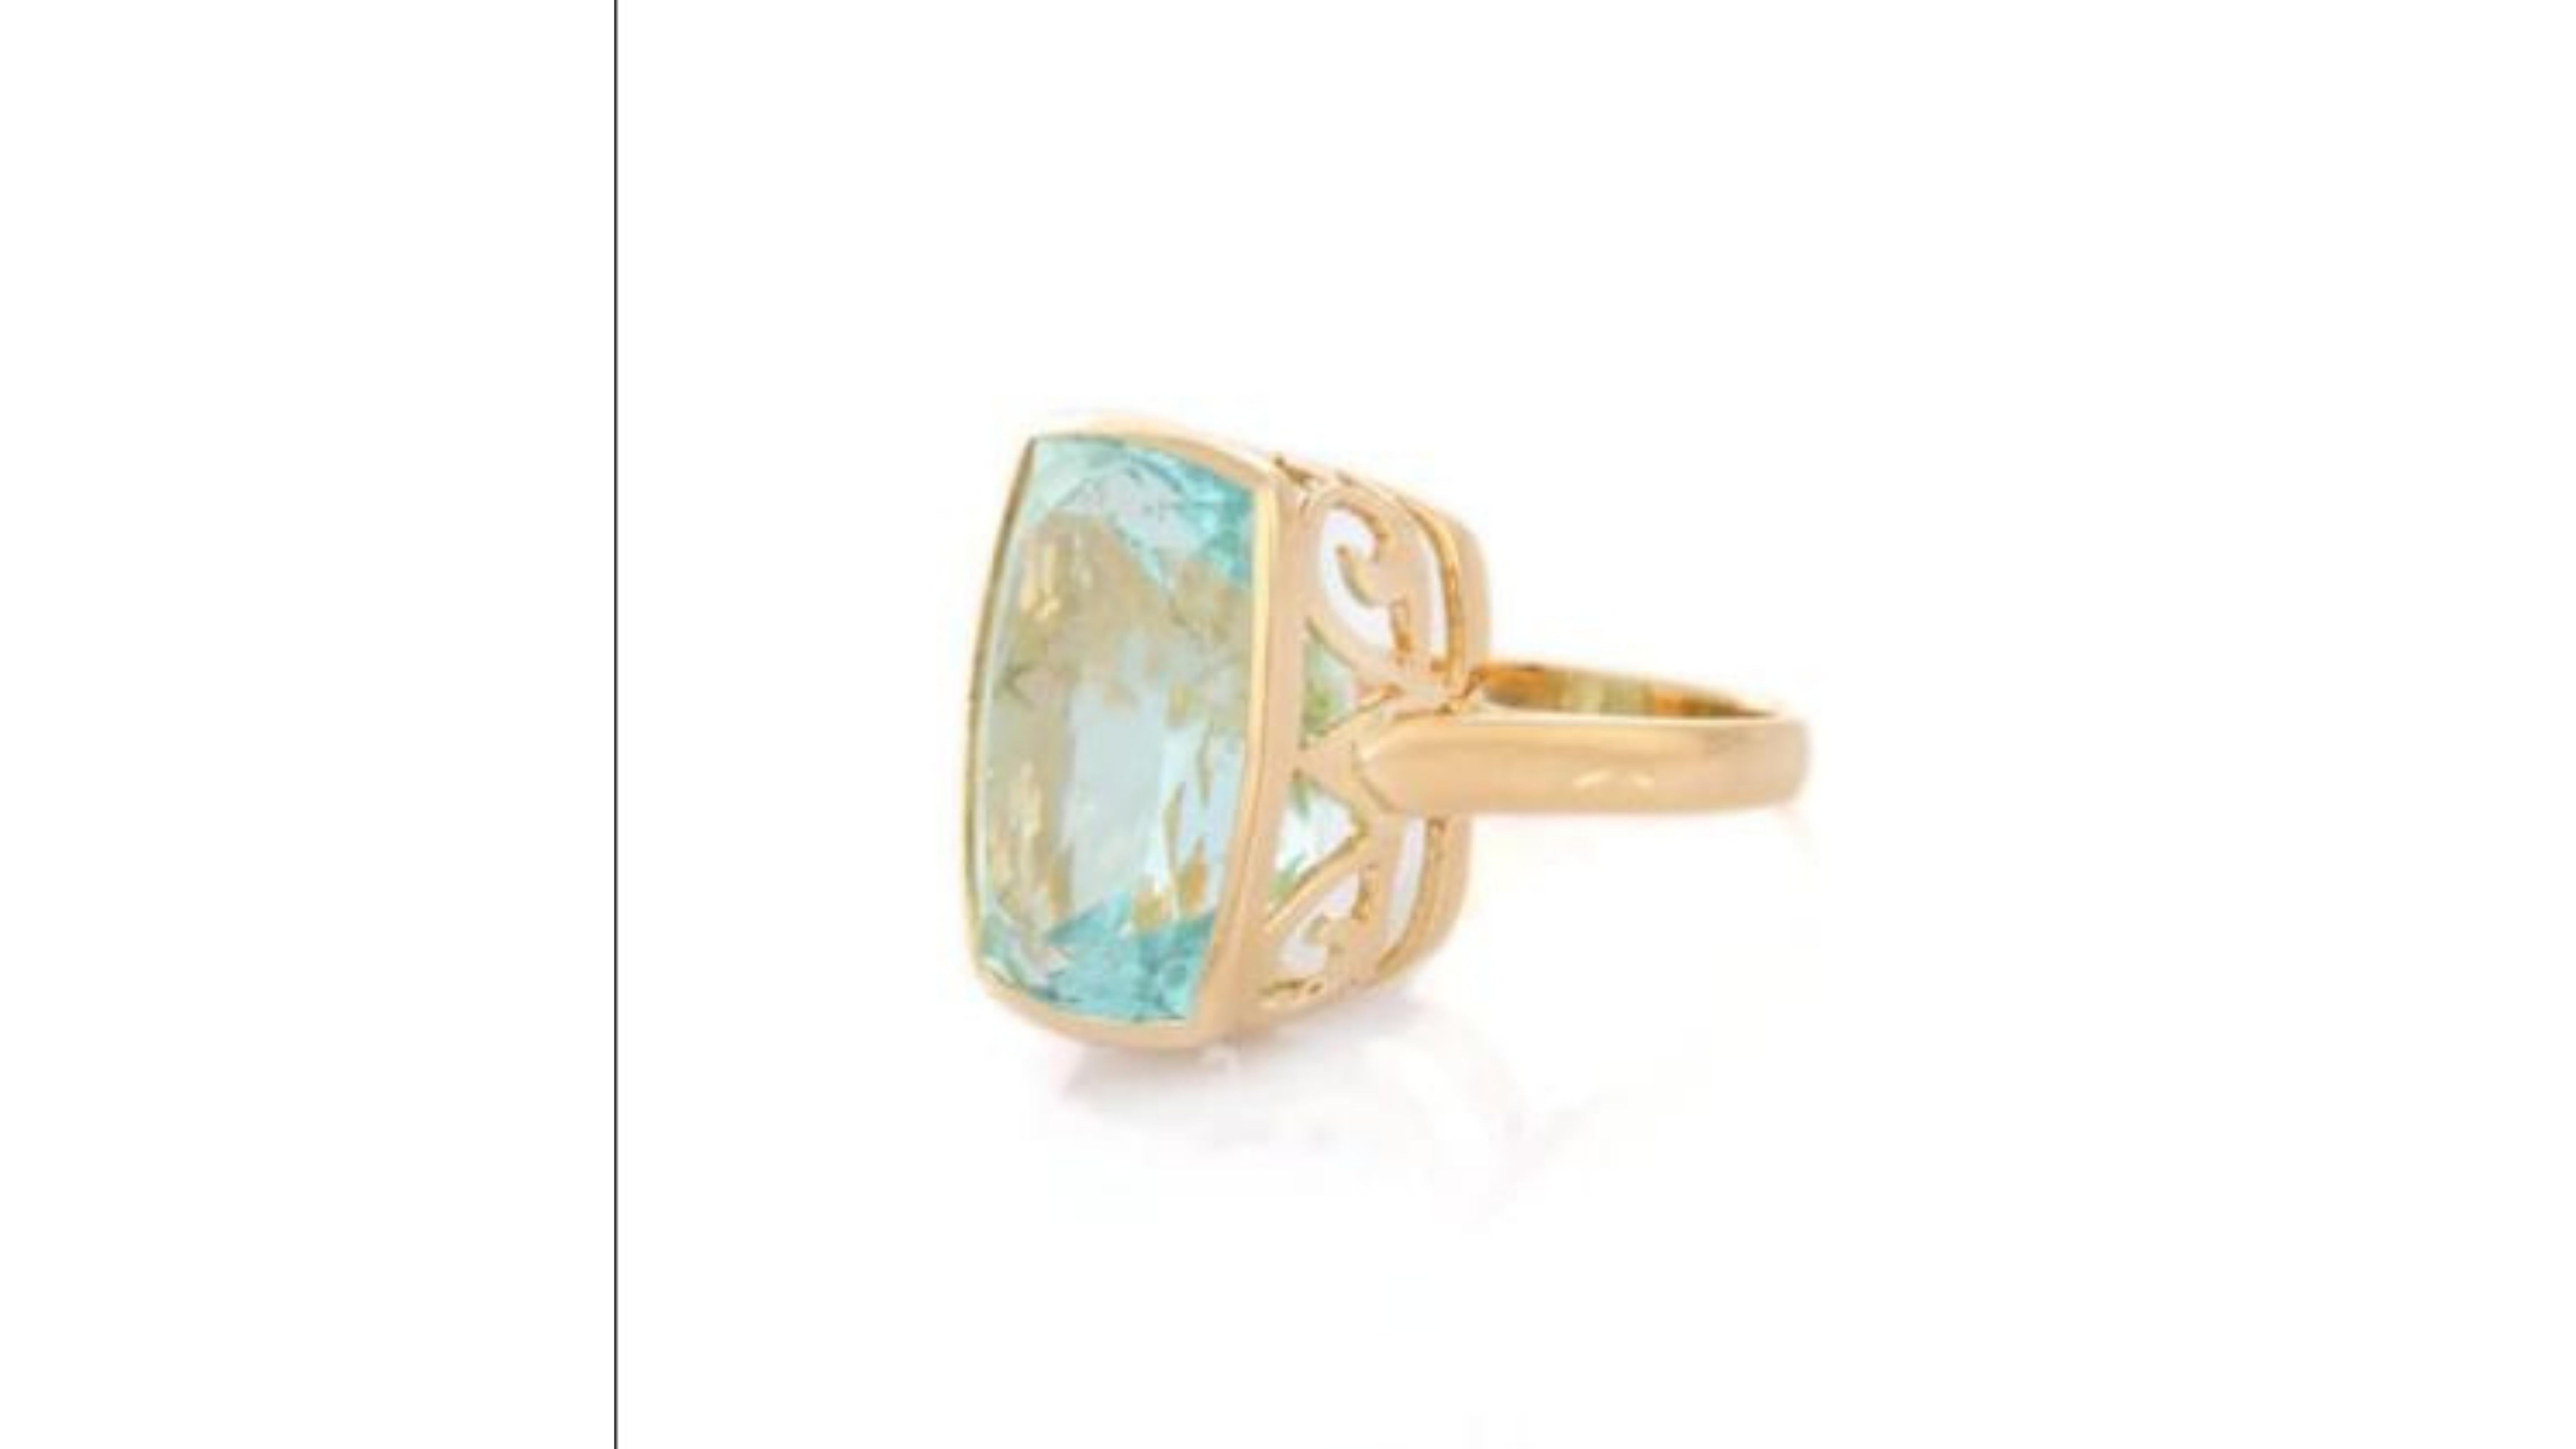 20.70 Carat Aquamarine Ring  18 Karat  Yellow Gold . If you are looking for other types do let us know as we have others to show and any can be custom made too.

Aquamarine with diamonds at each side and sparkling like a crystal clear ocean, it was